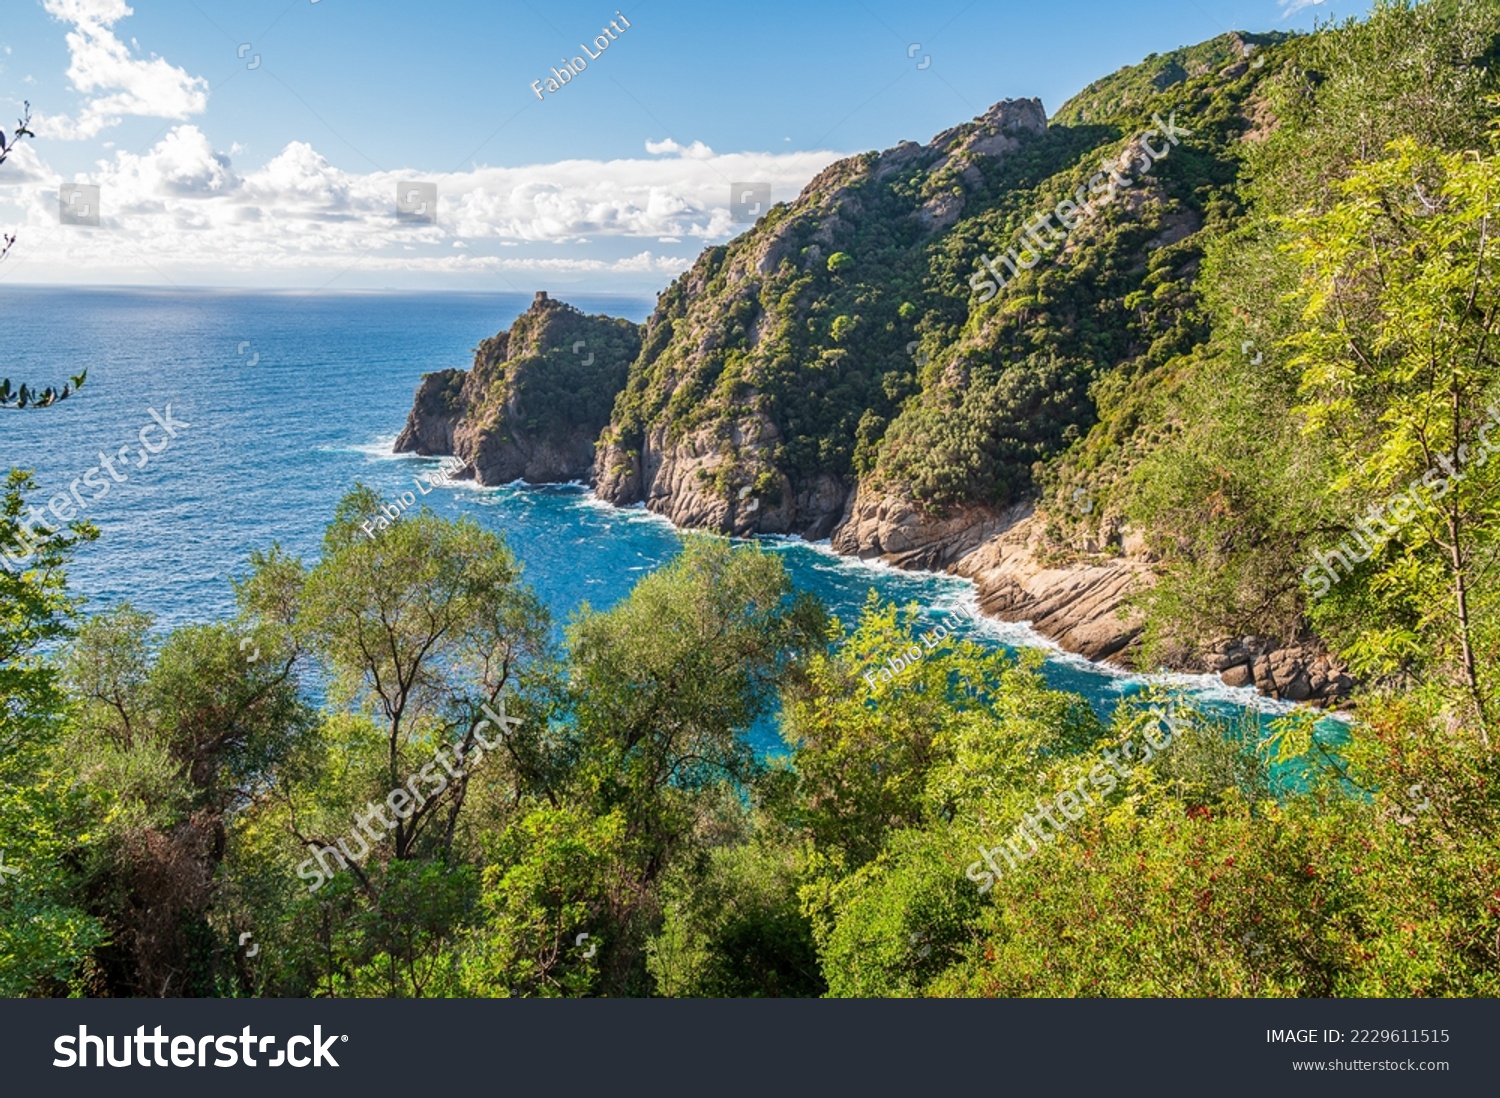 Promontory of the Gulf of San Fruttuoso, in the Maritime National Park of Portofino in Italy #2229611515